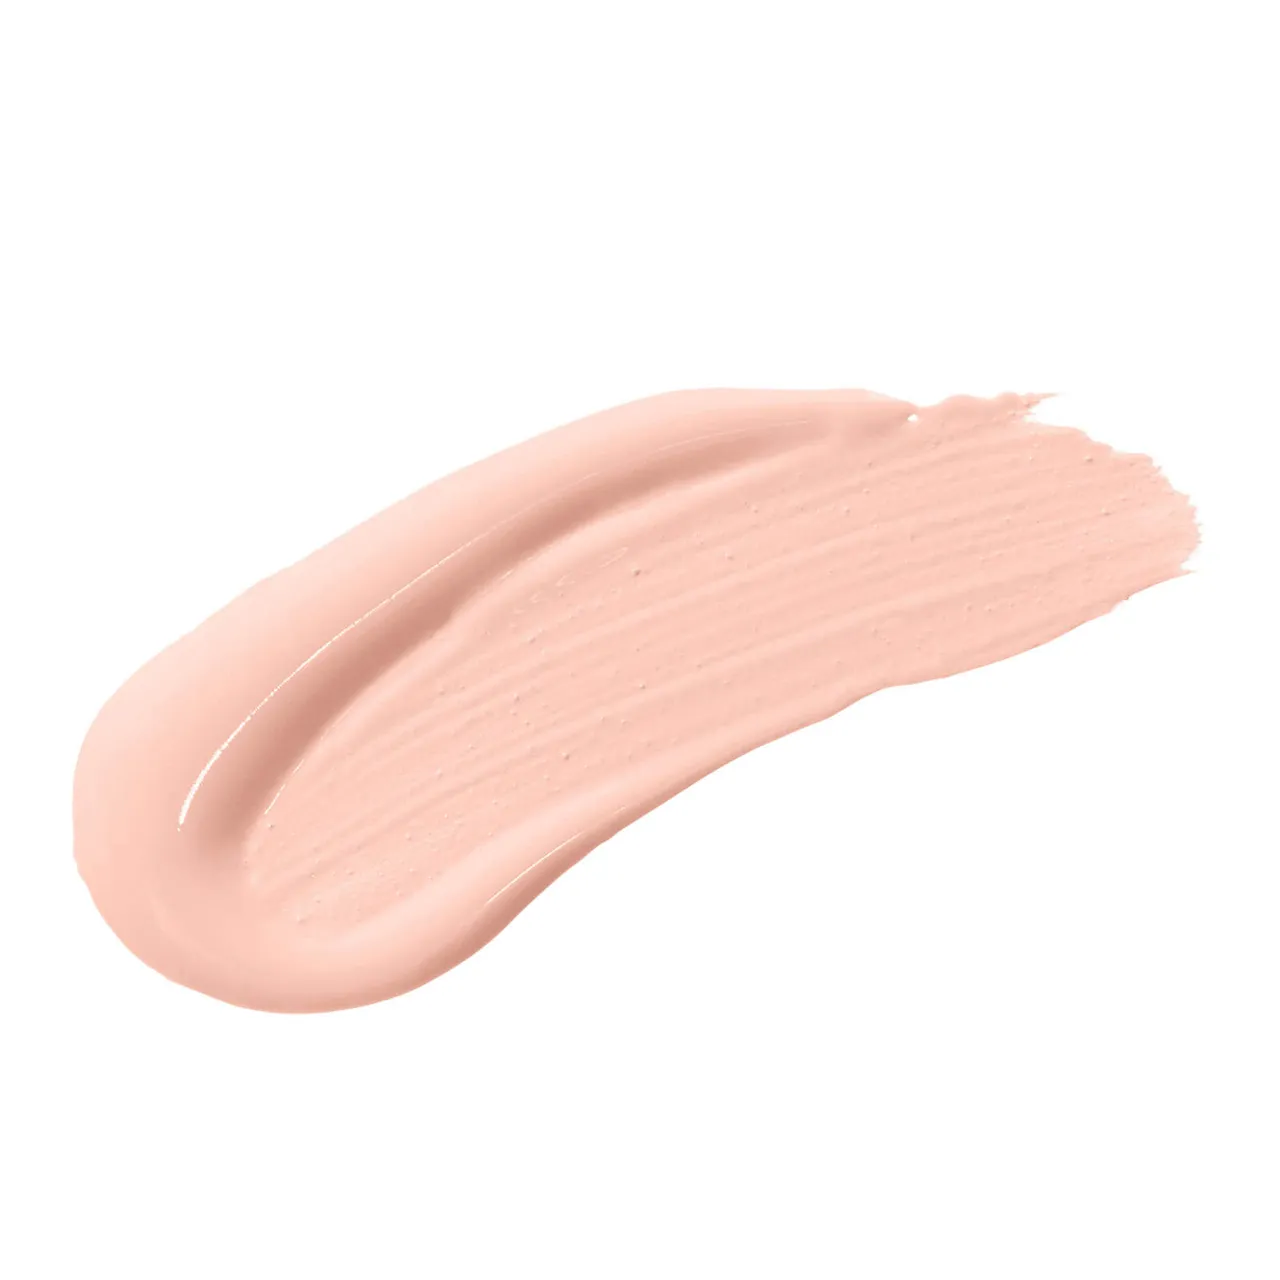 By Terry Light-Expert Click Brush Foundation 19.5ml (Various Shades) - 1. Rosy Light